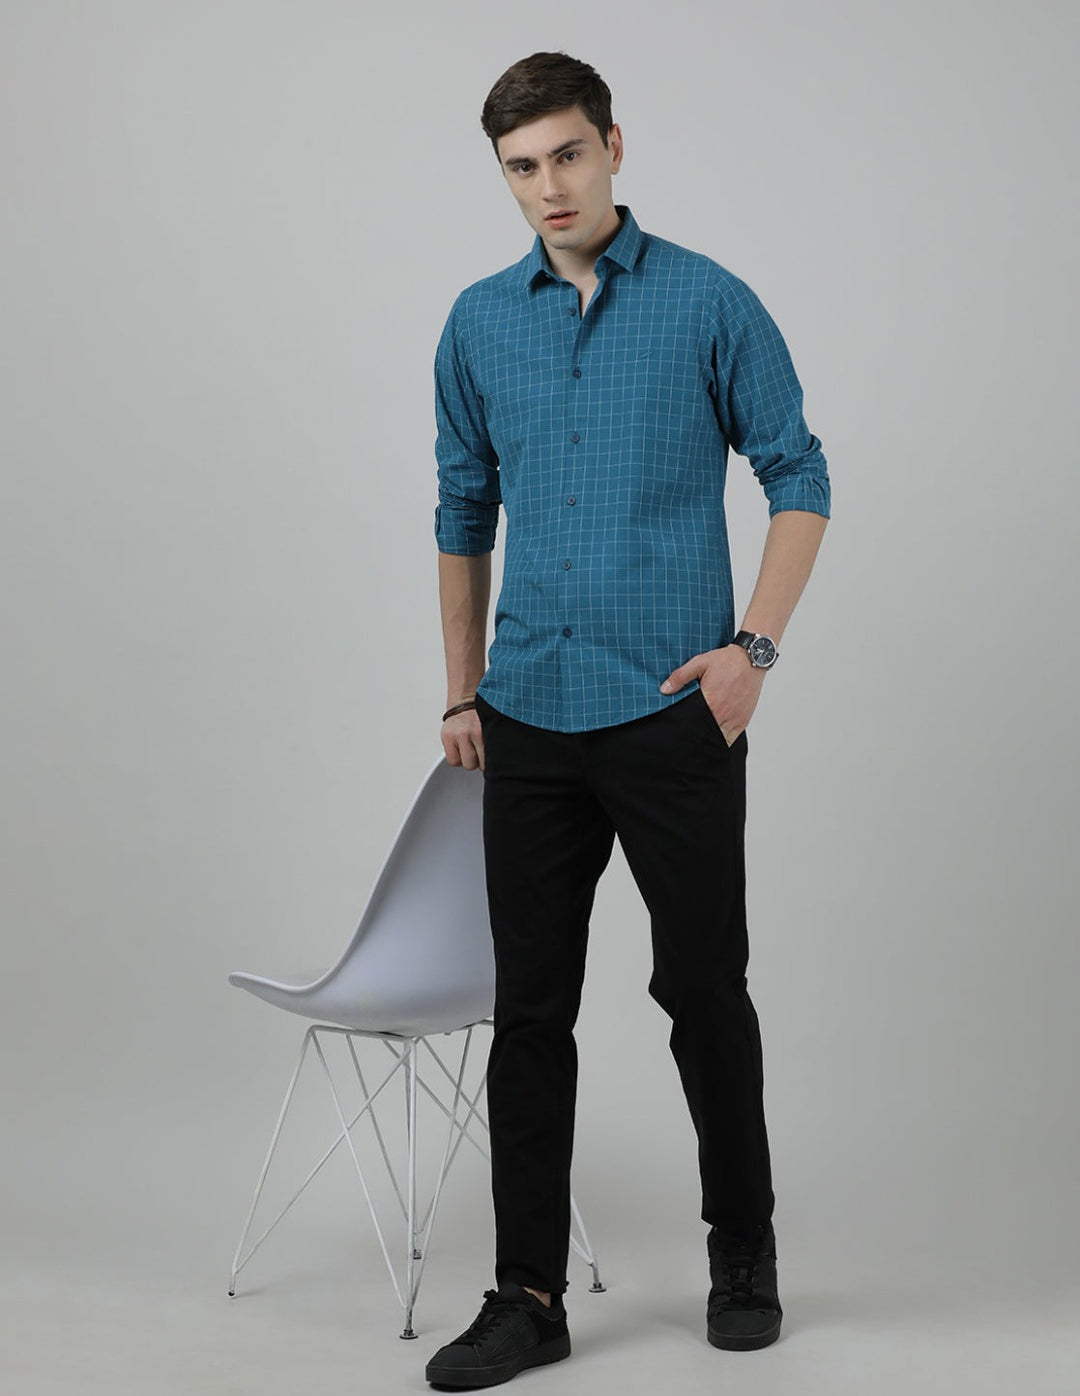 Crocodile Casual Full Sleeve Slim Fit Checked Shirt Teal for Men